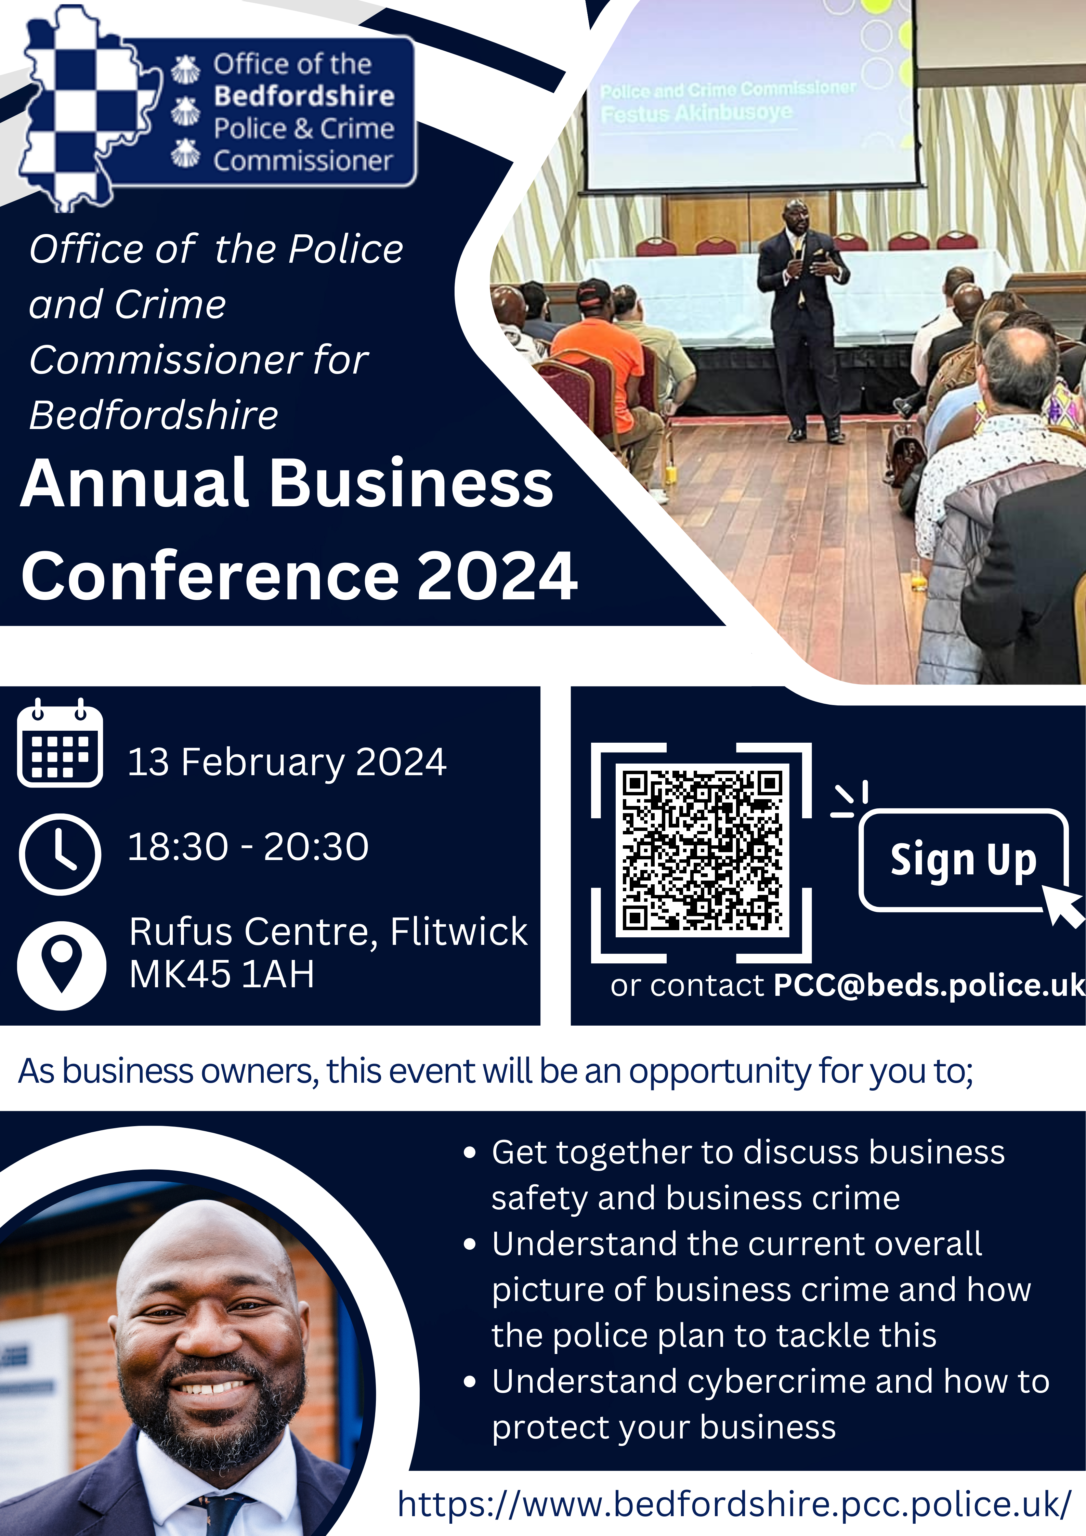 Annual Business Conference 2024 Bedfordshire PCC